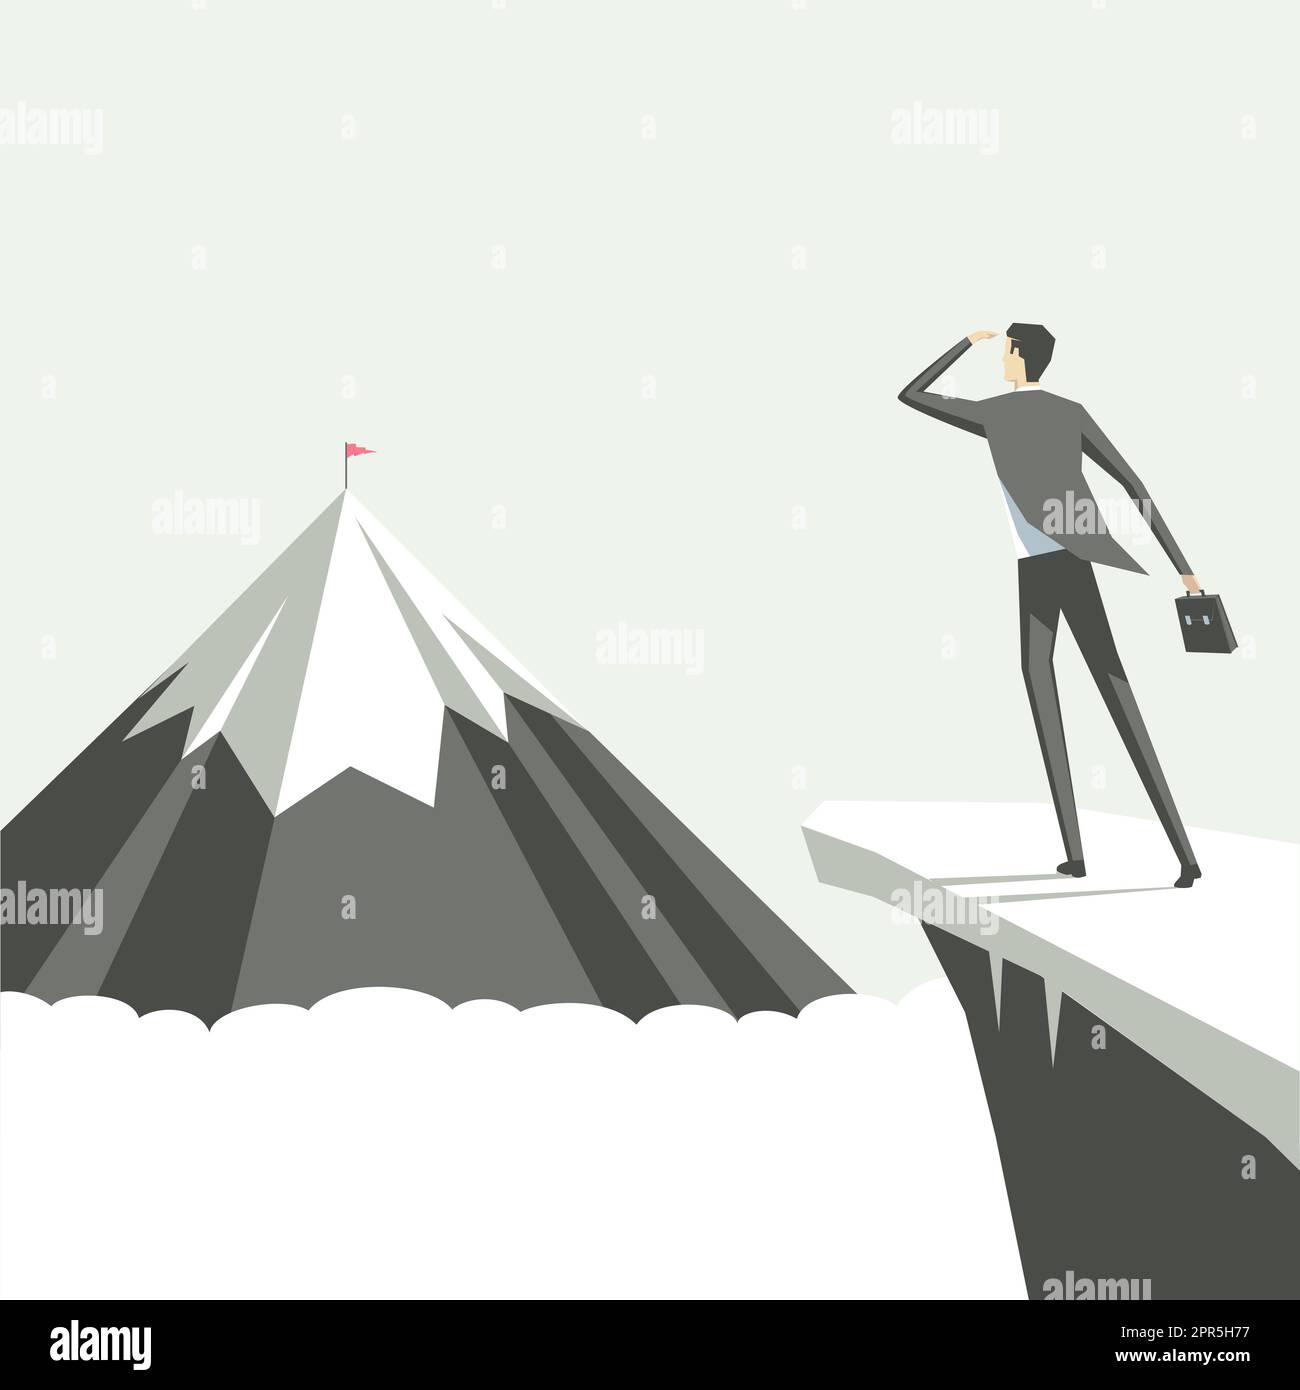 Man On A Mountain Drawing Proud Of His Climbing Success To The Clouds. Athlete On A Cliff Celebrating Achievement Ascending To The Top. Sports Guy Reaching The Sky. Stock Vector